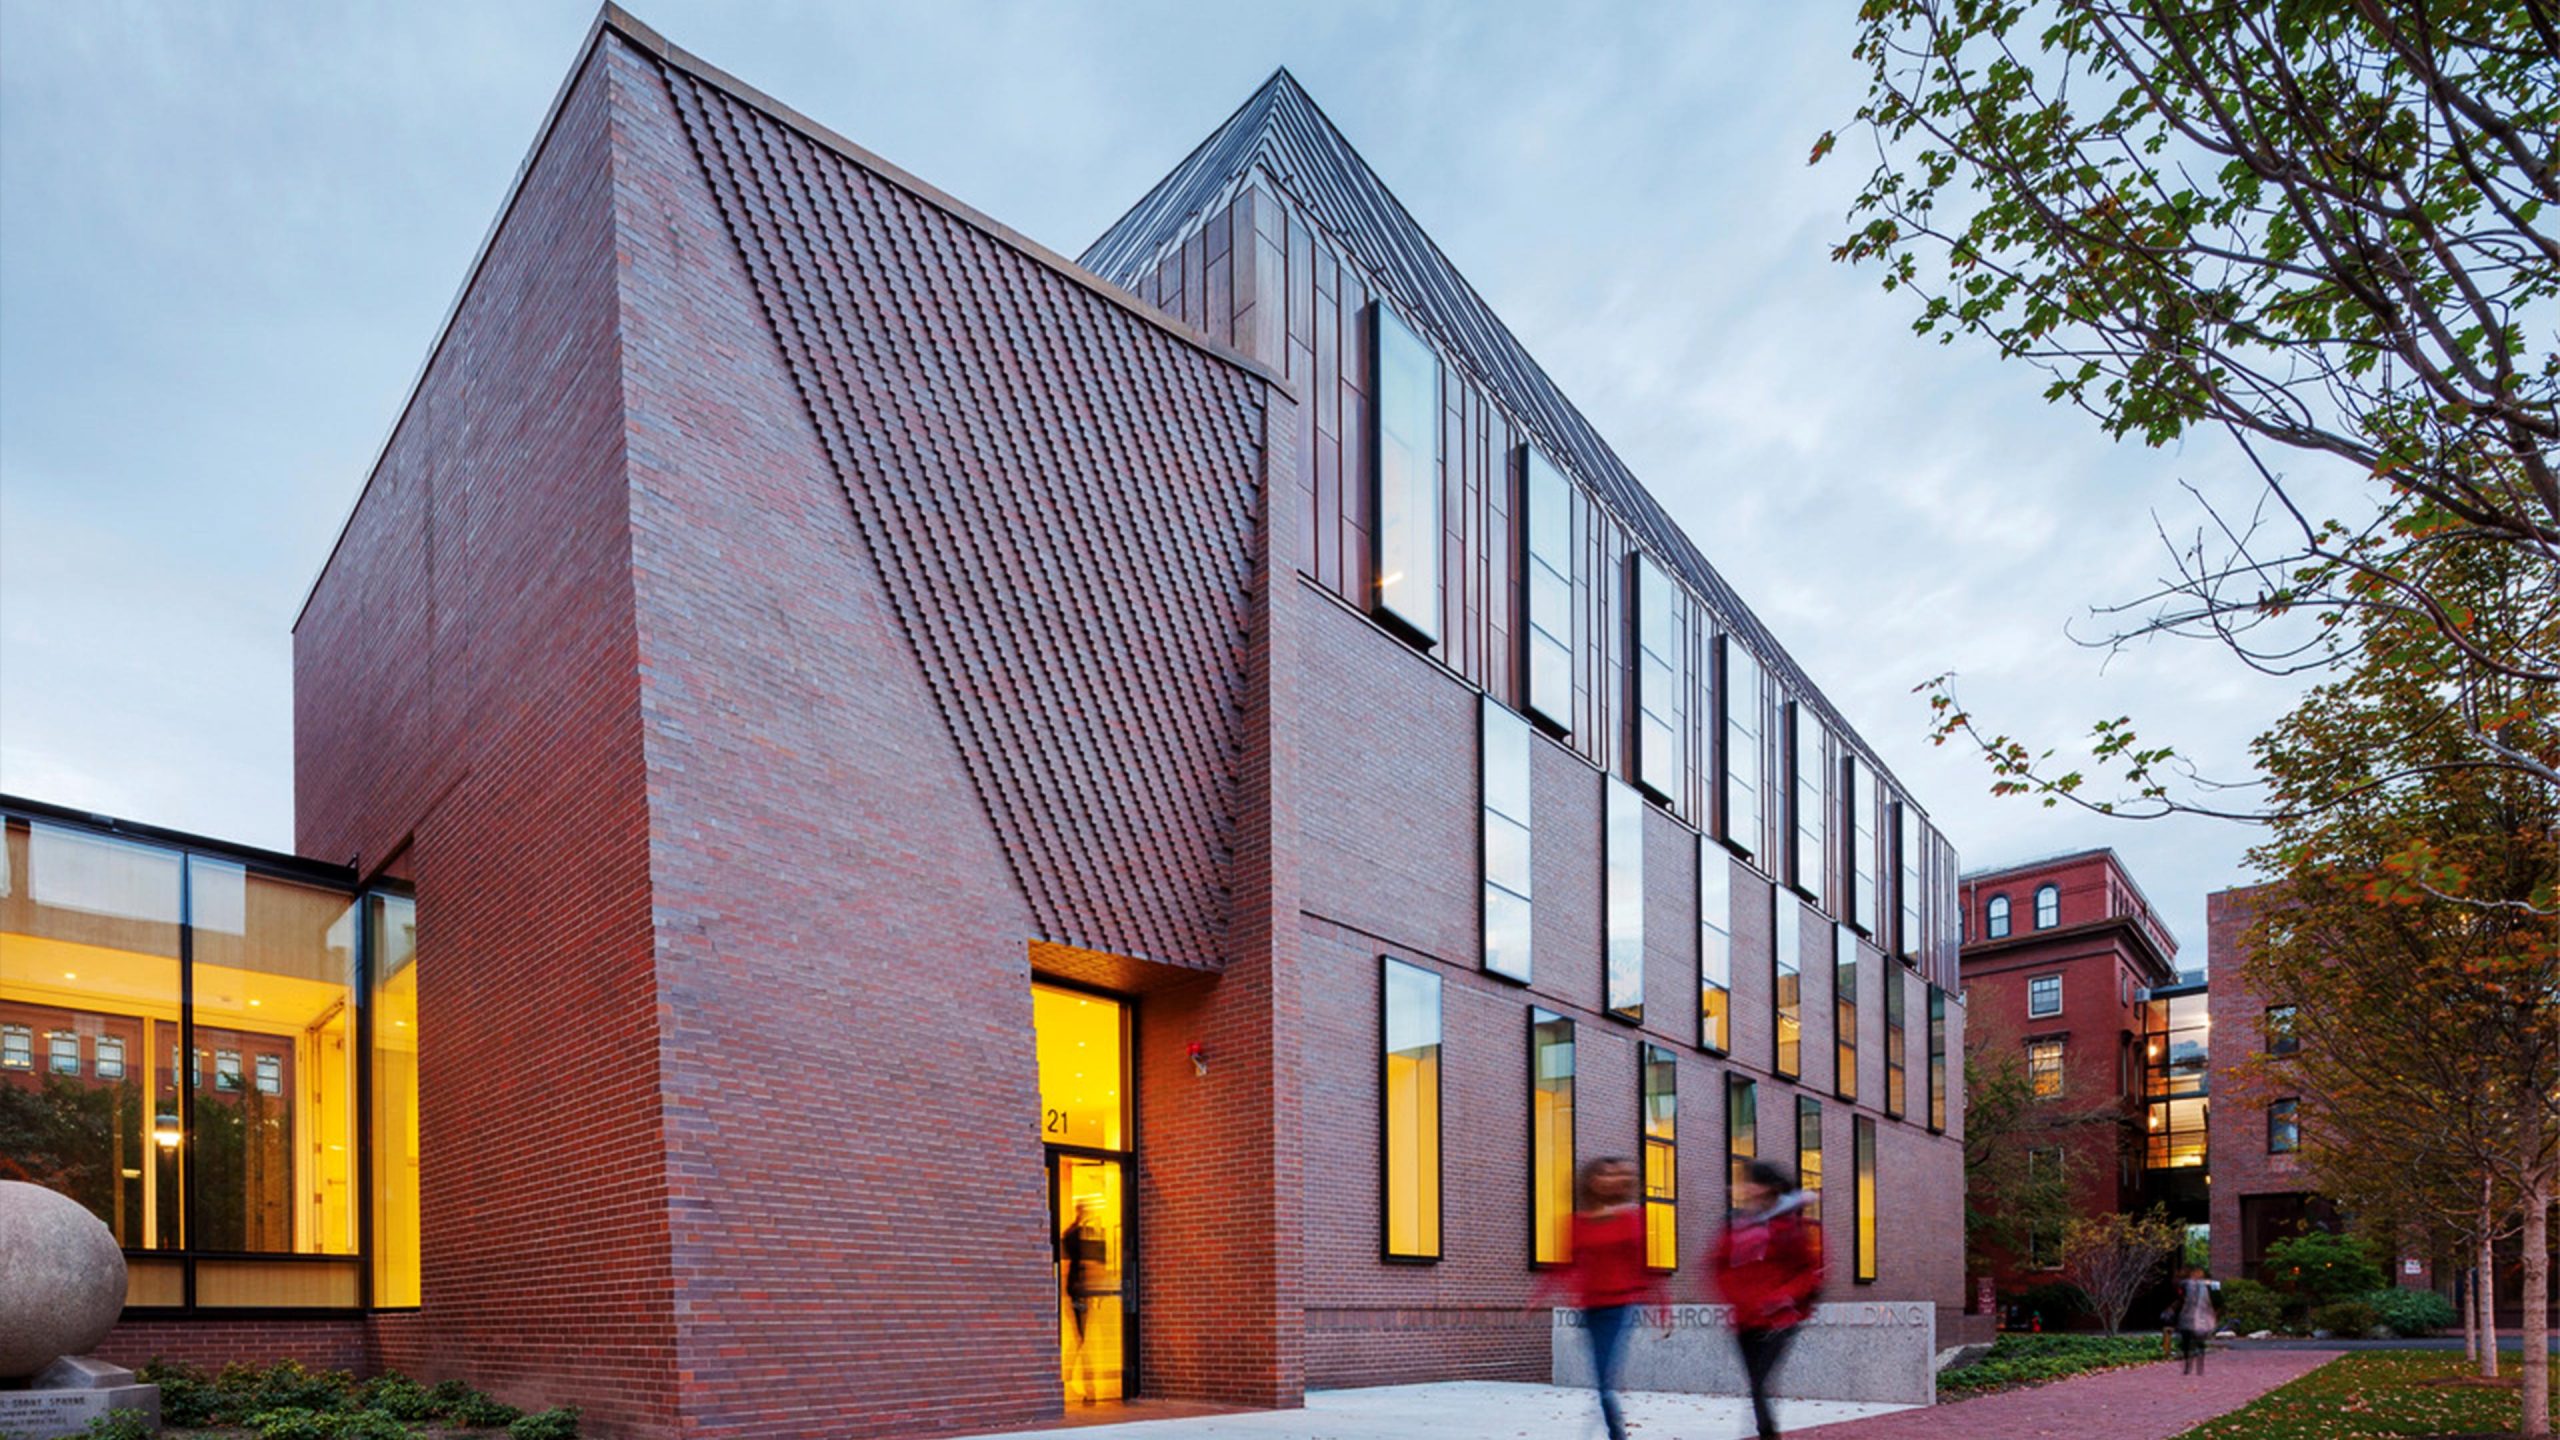 Exterior view of the renovation and expansion of the Tozzer Anthropology Library at Harvard University